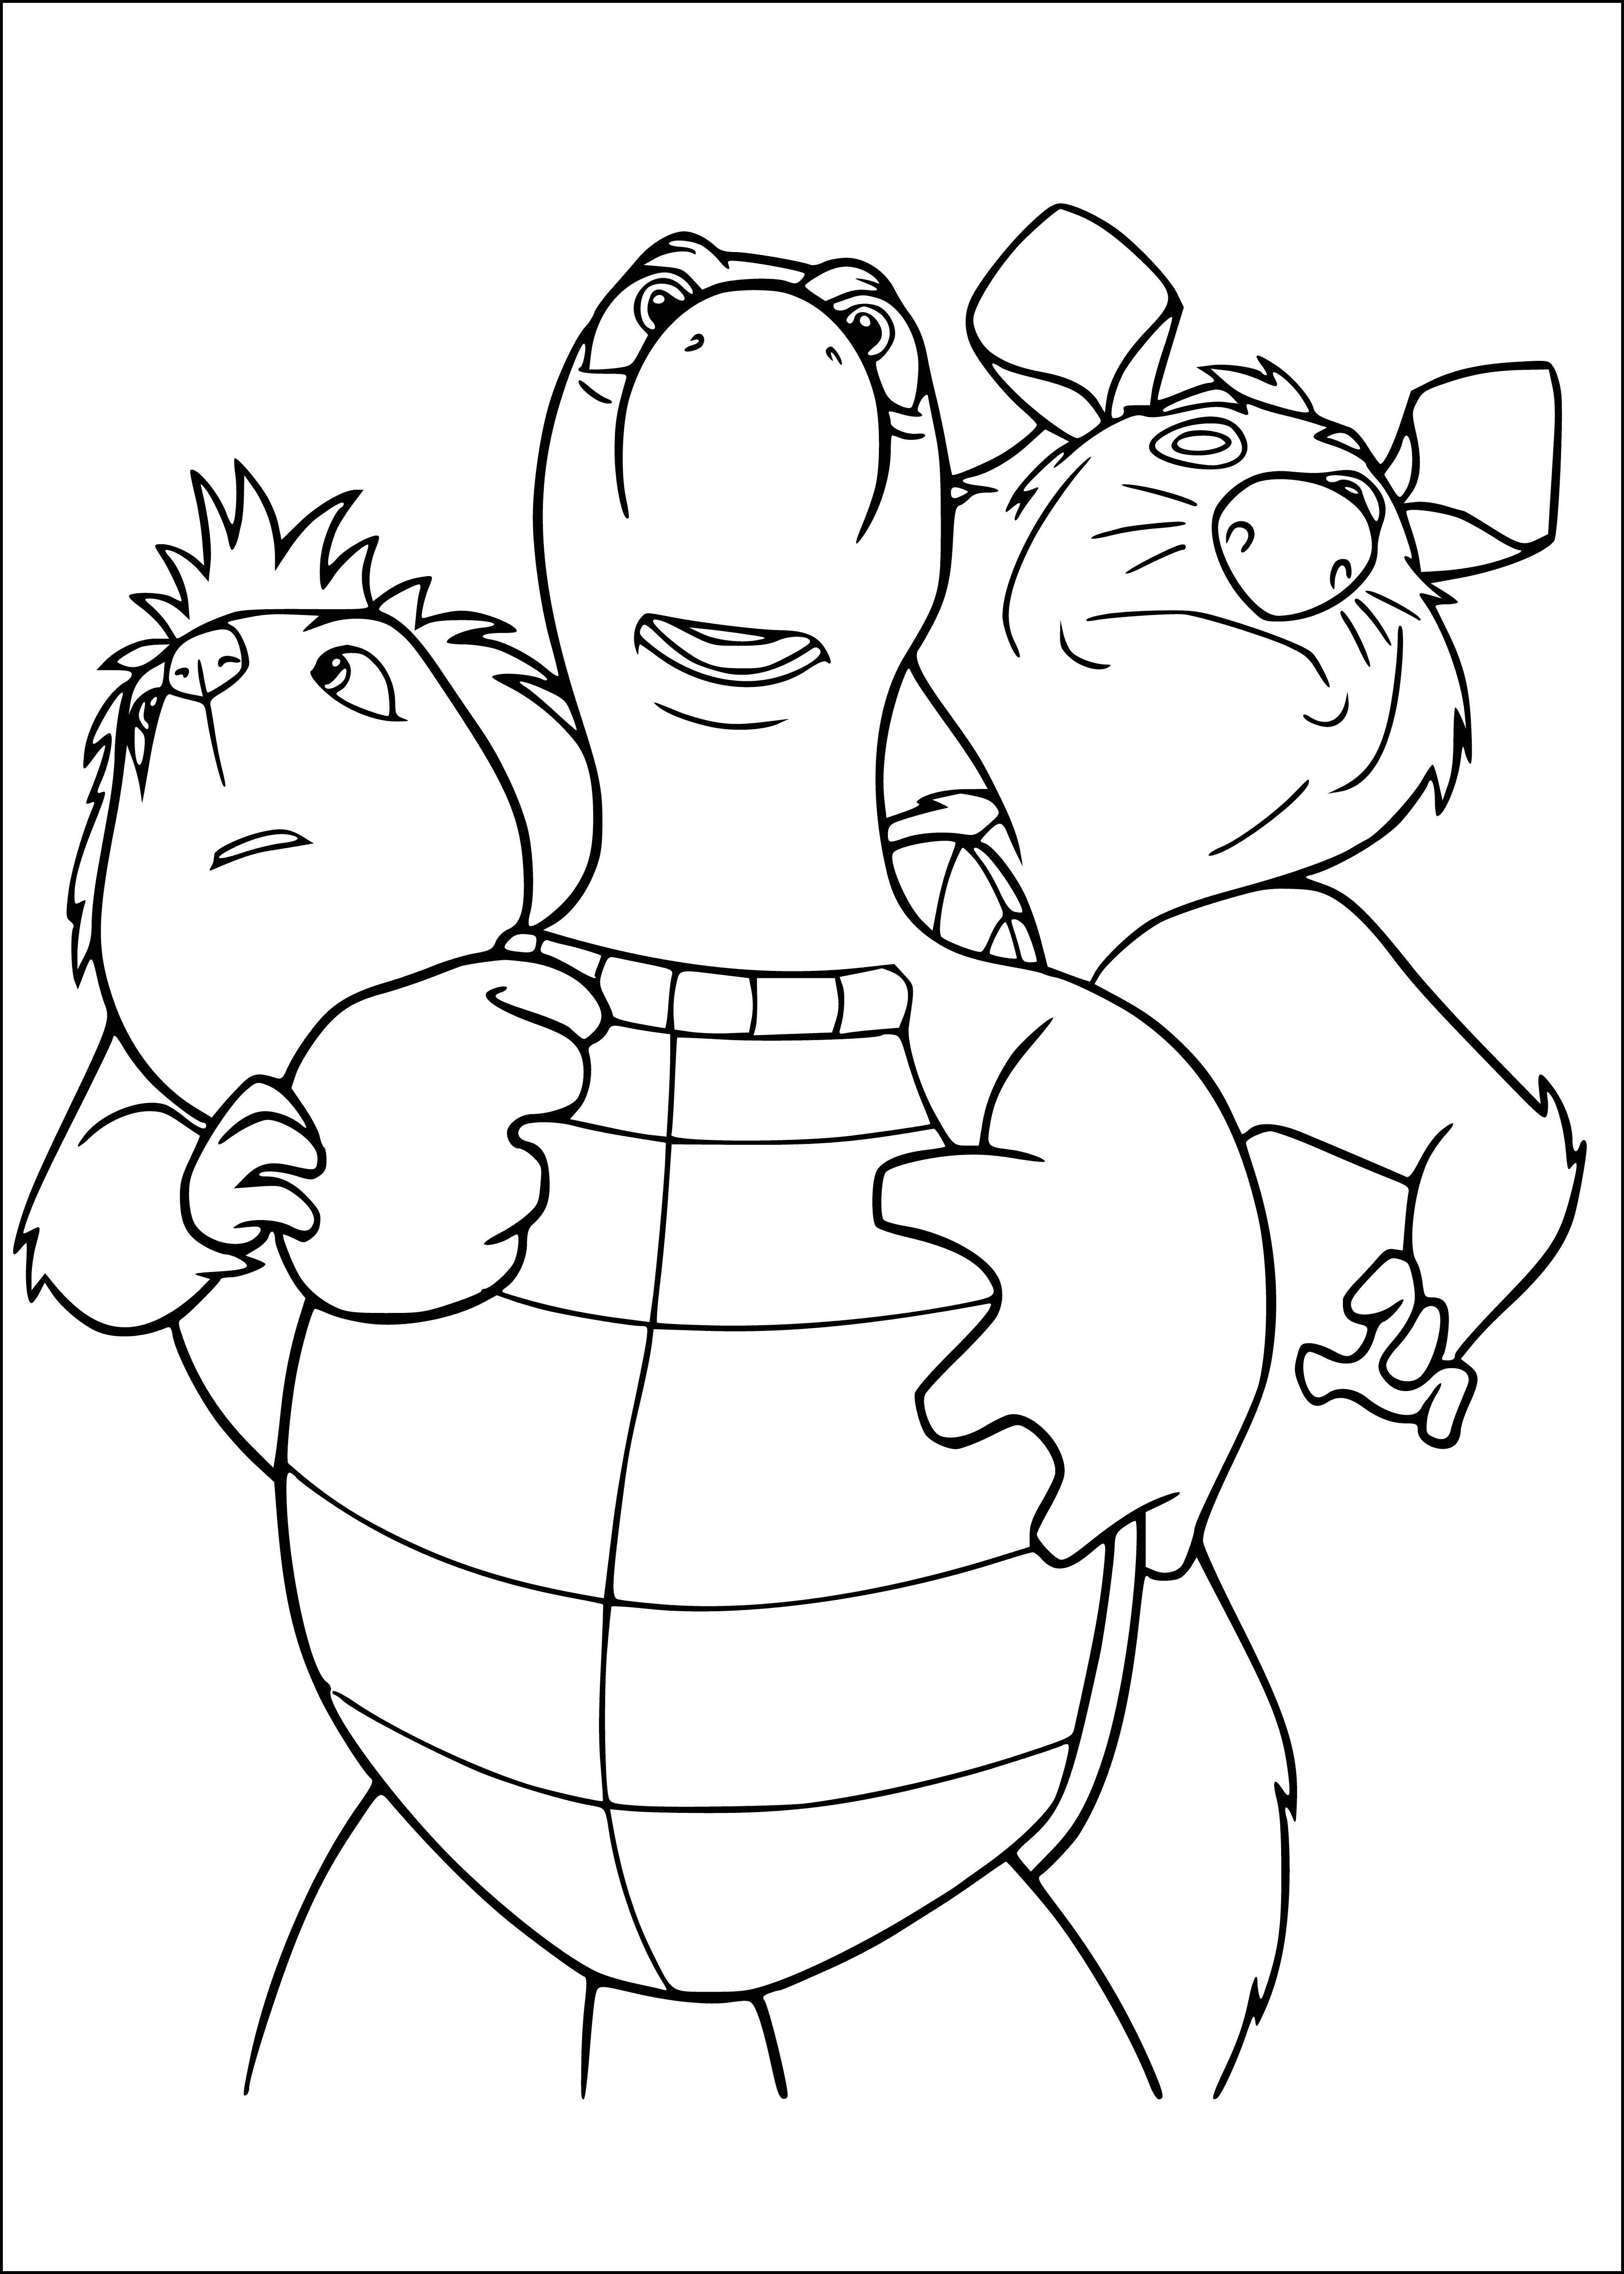 coloring page: 3 turtles & an opposum on a log - the turtles different sizes & the opposum looks up to them.